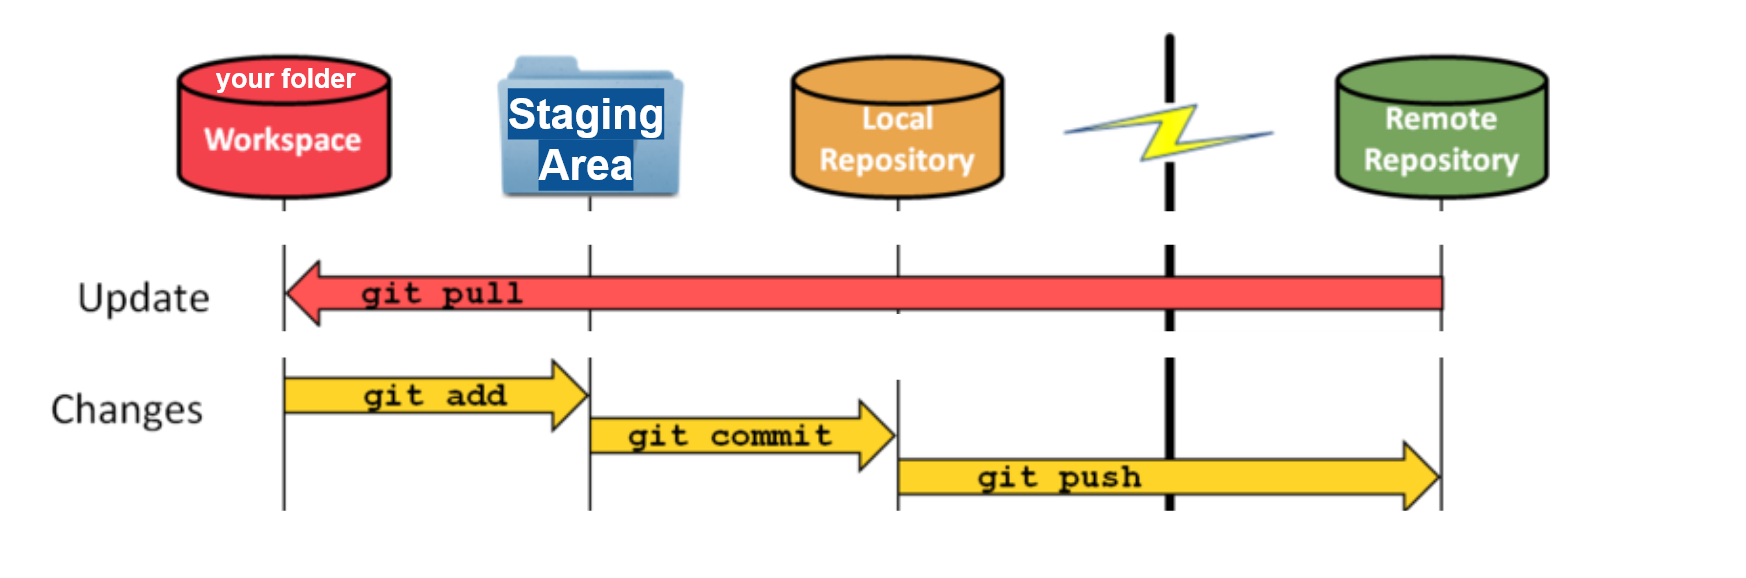 Use git pull to download content from a remote repository to the workspace and update the local repository to match that content. Use git push to upload local repository content to a remote repository.